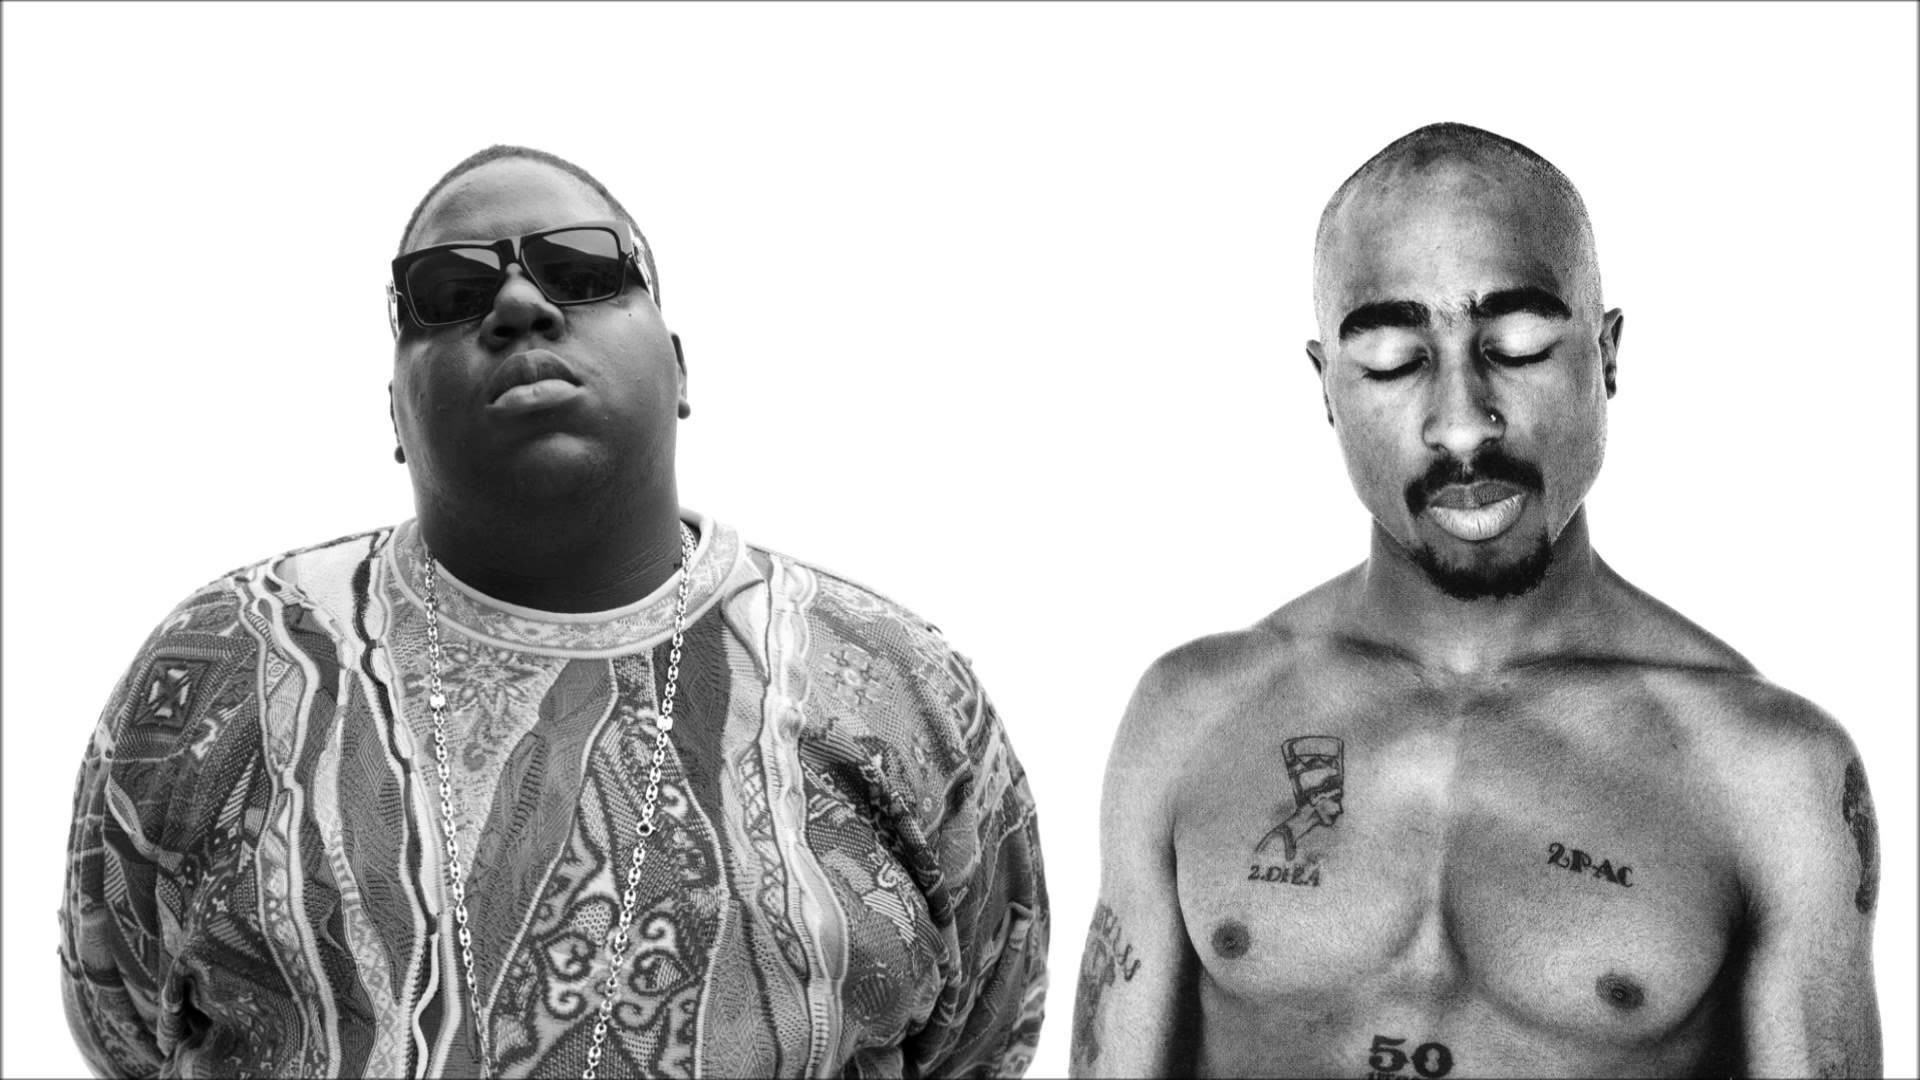 1920x1080 The Los Angeles Police Department has solved the murders of rappers  Christopher “Biggie Smalls” Wallace and Tupac Shakur, according to a  documentary ...